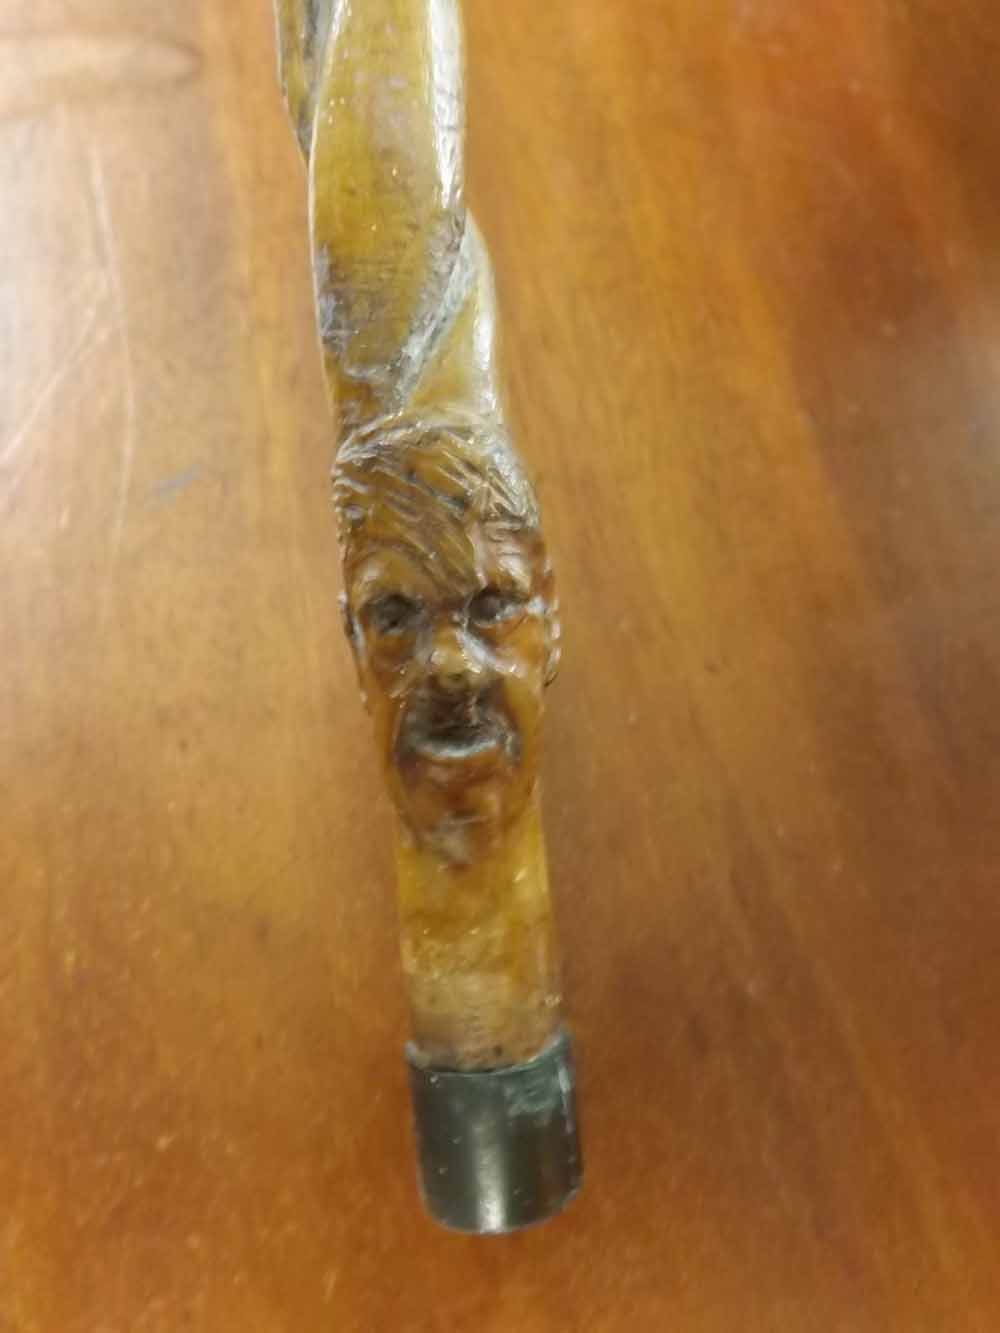 Carved walking stick, marked "W Curtis Aylsham 1939-1945 The Big Three Victory", 32" long - Image 3 of 4